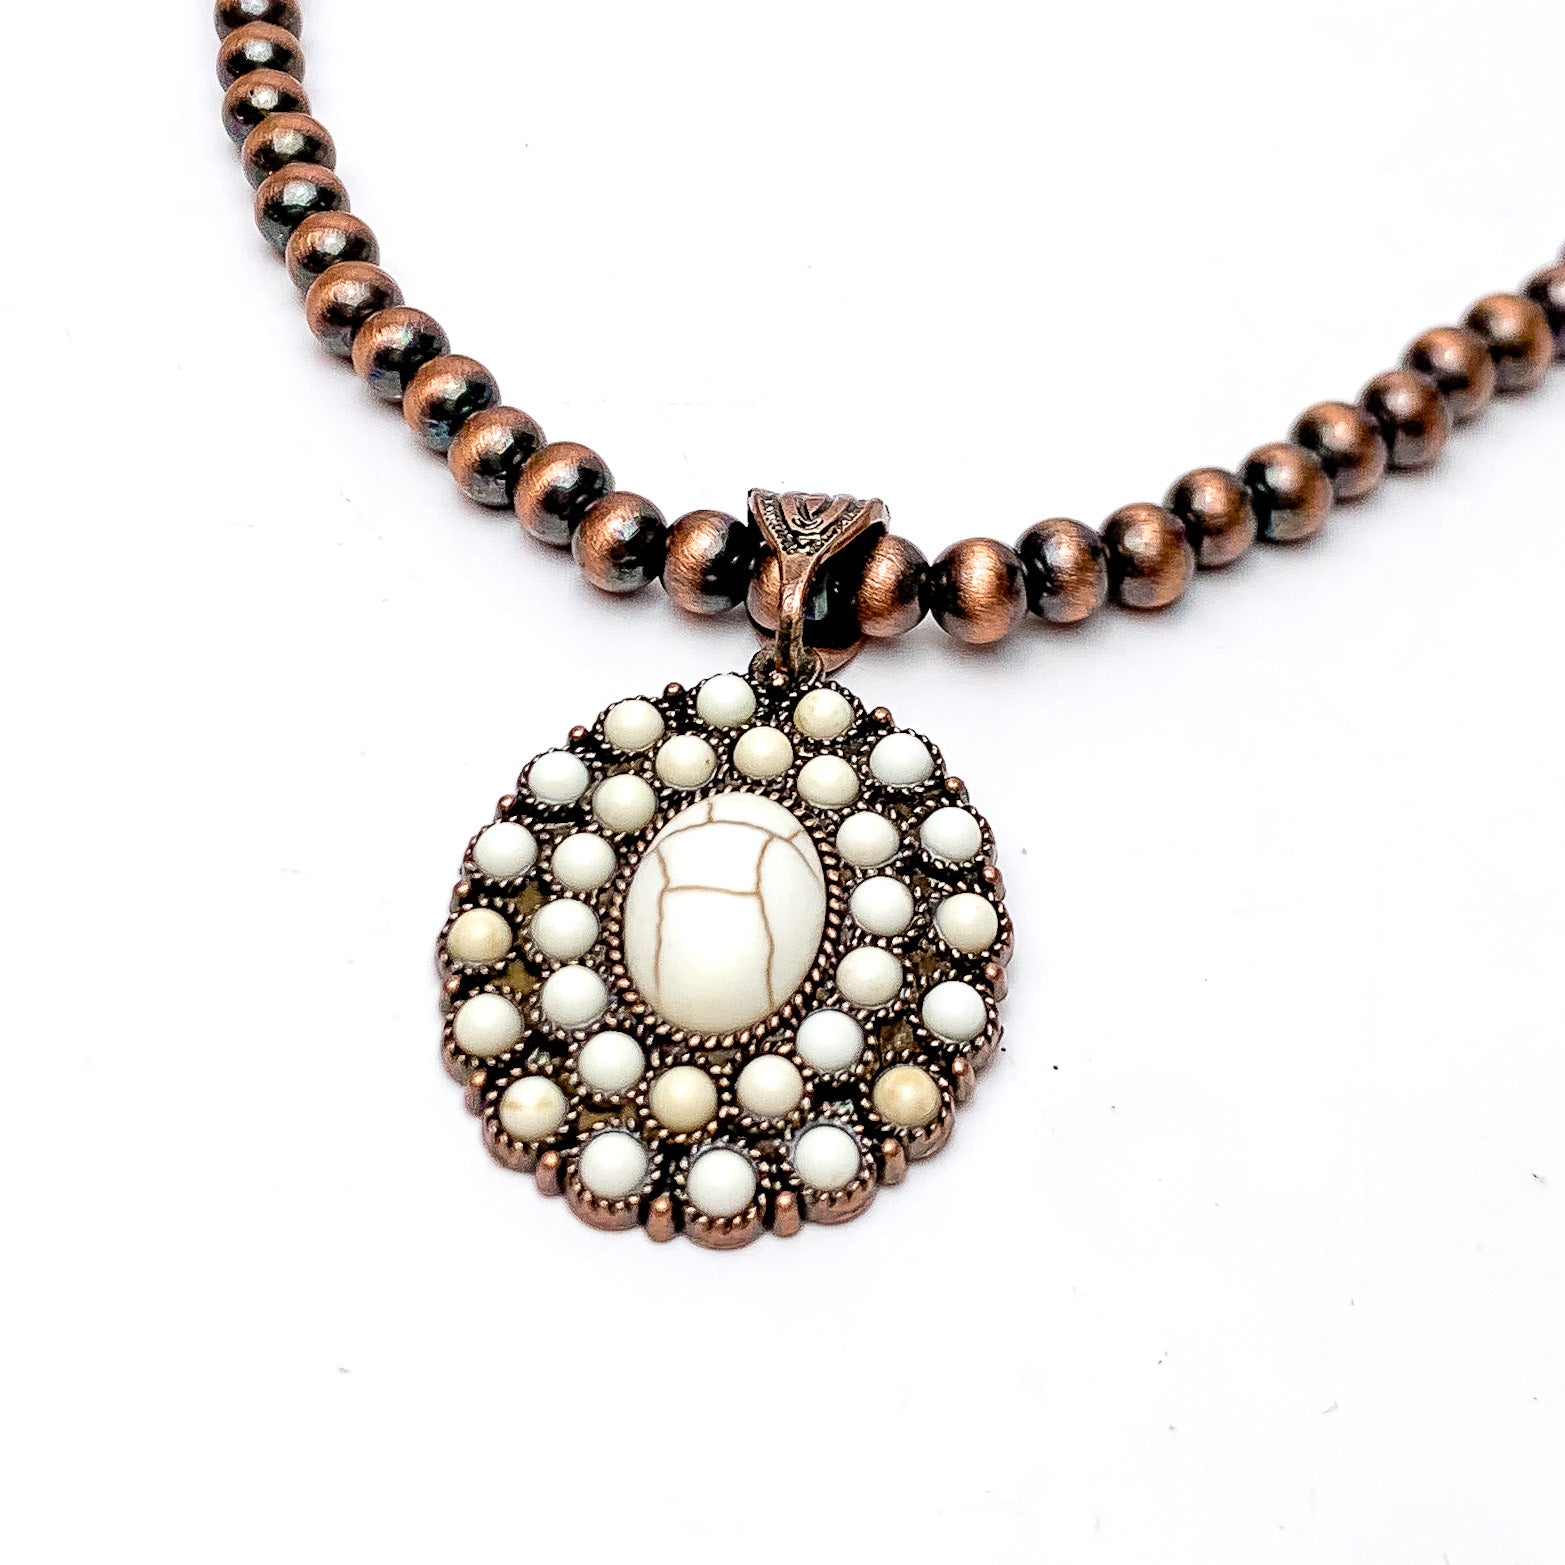 Copper Tone Pearl Necklace With Stone Cluster Pendent in Ivory - Giddy Up Glamour Boutique